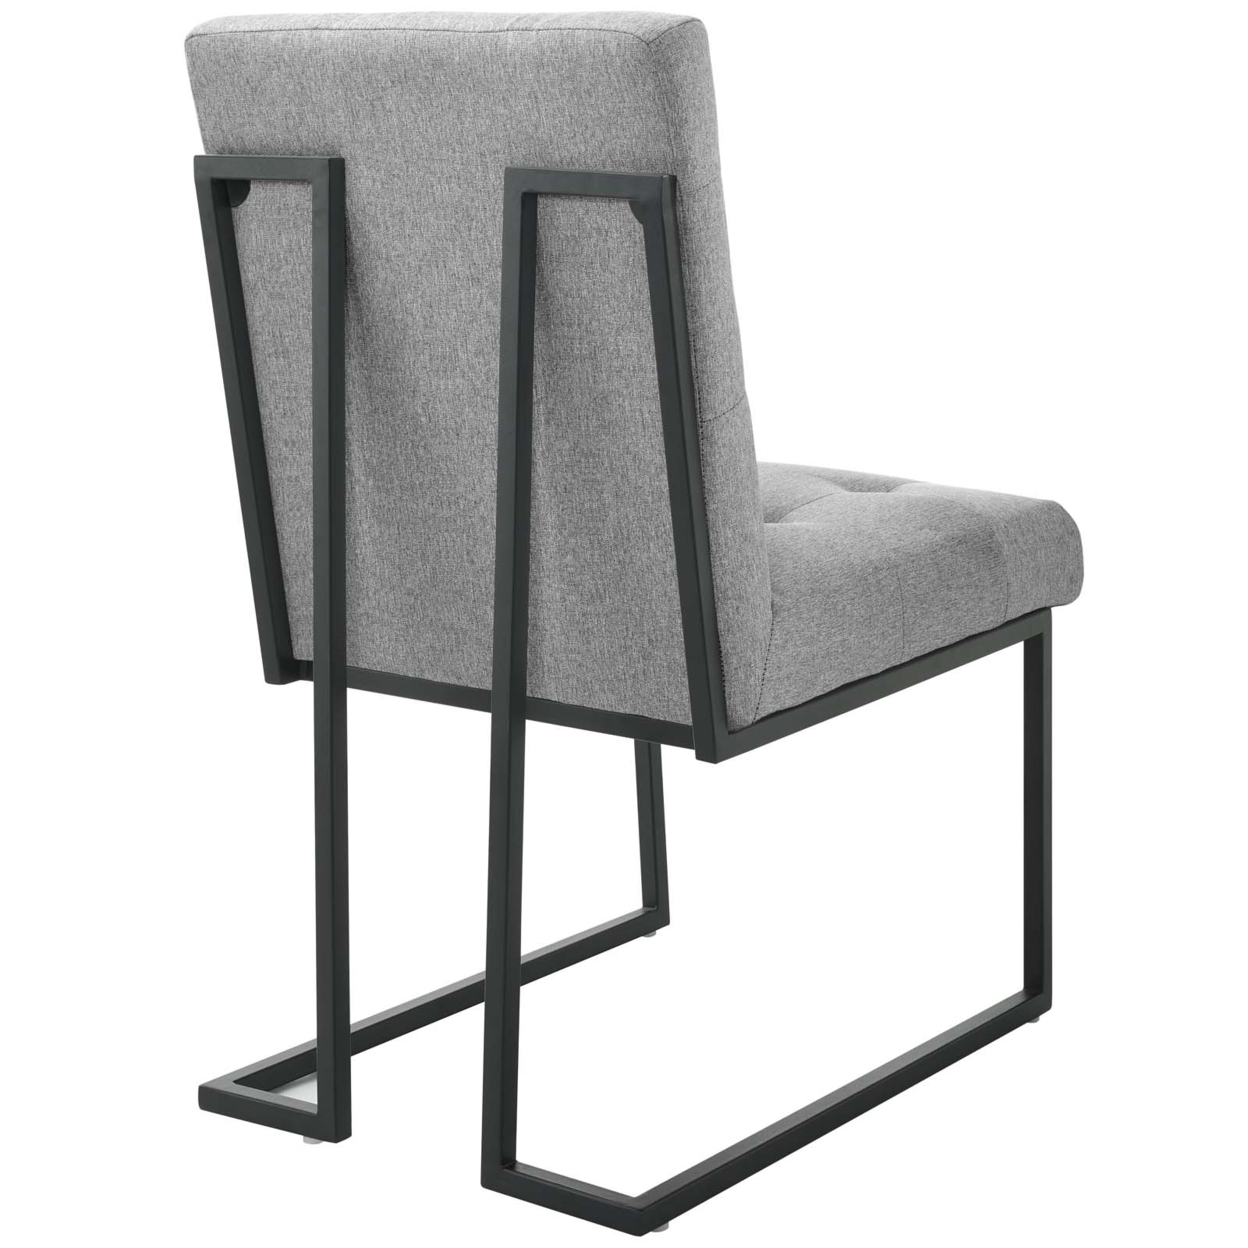 Privy Black Stainless Steel Upholstered Fabric Dining Chair Set Of 2,Black Light Gray